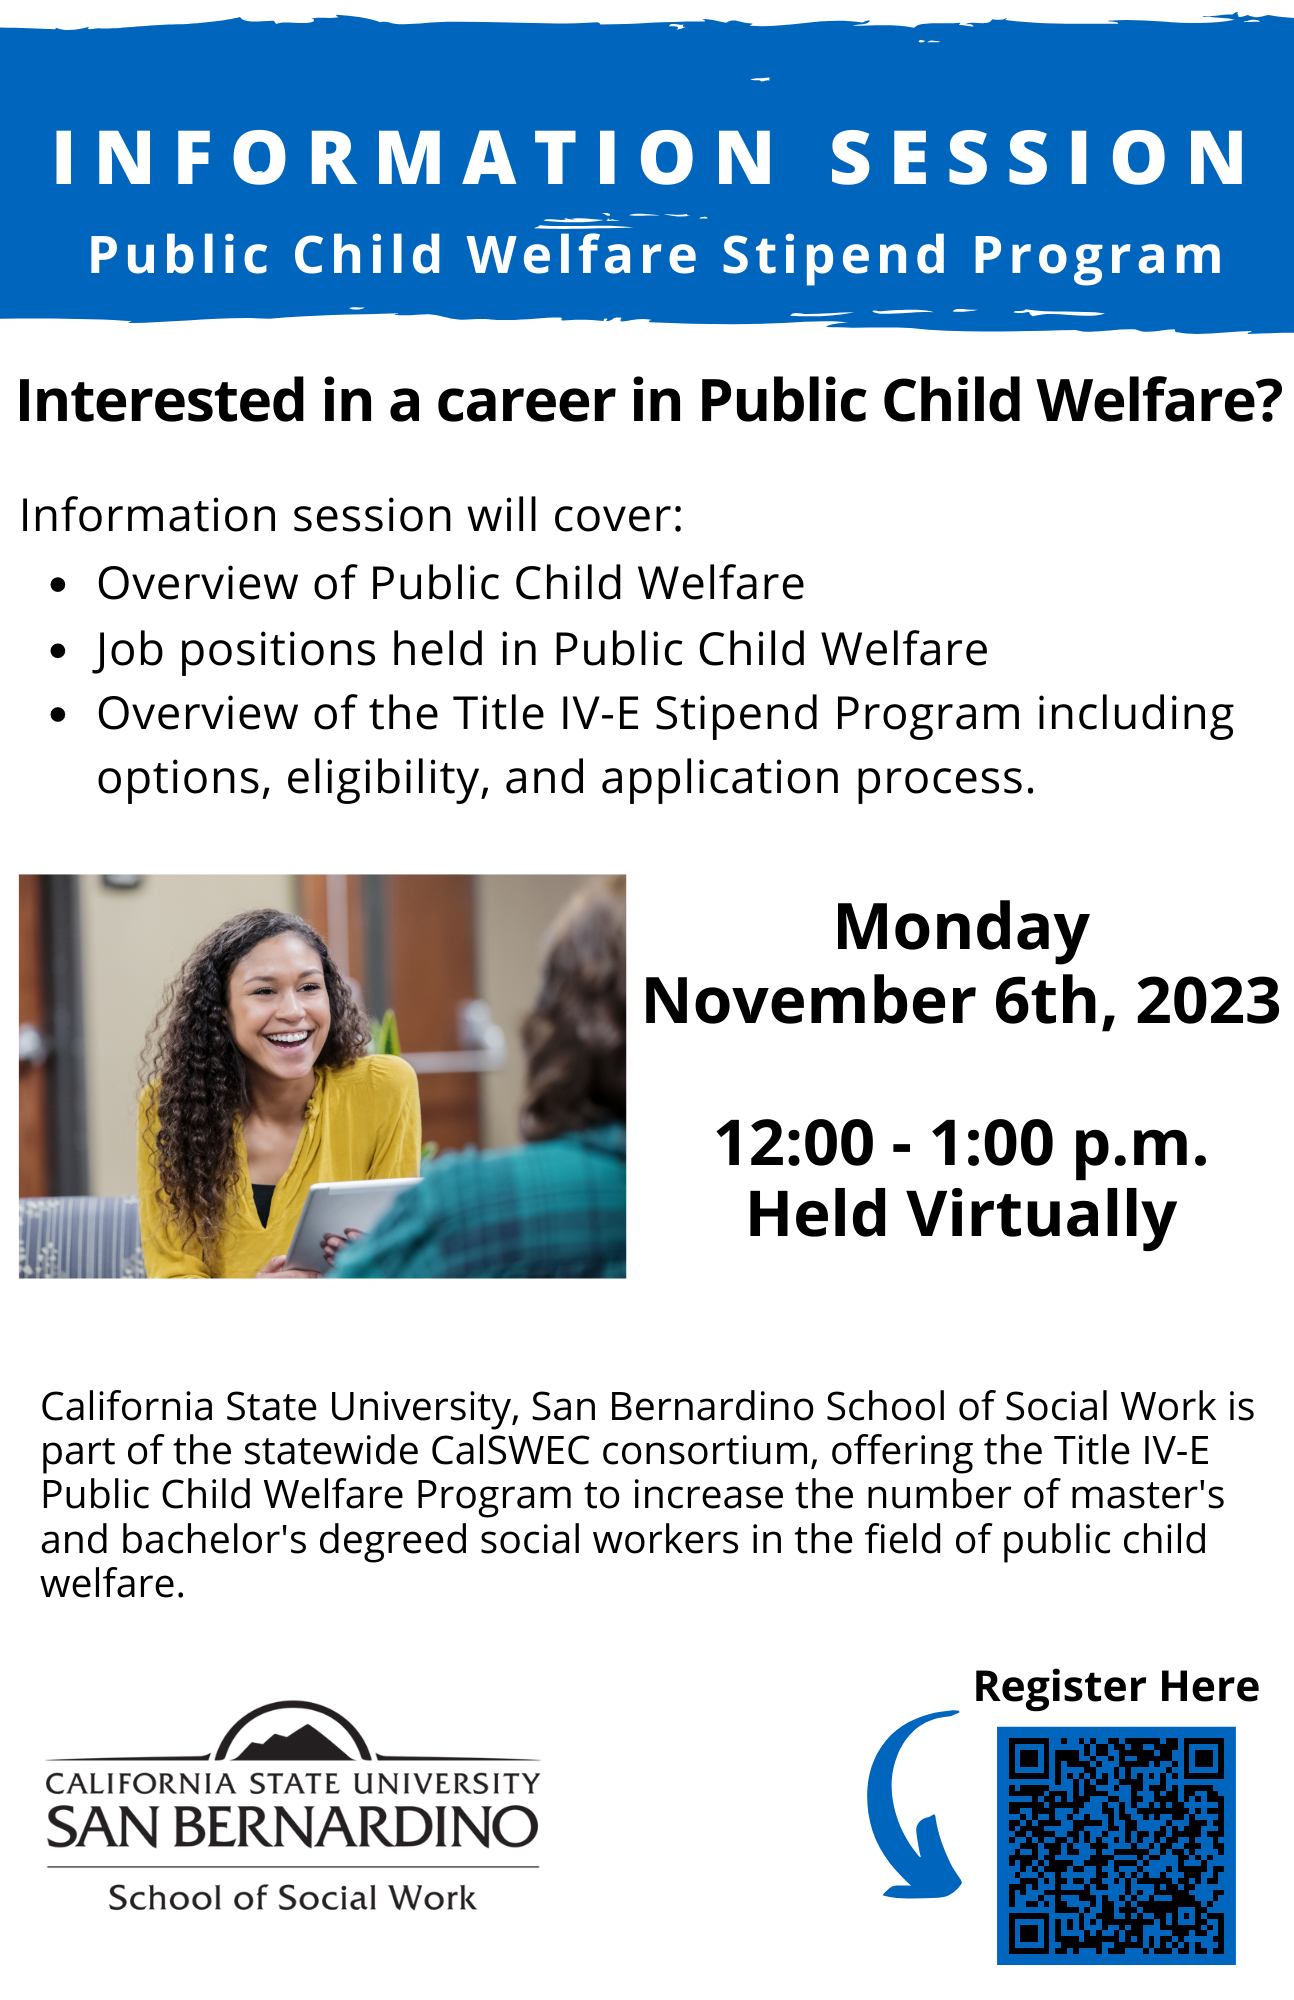 Interested in a career in Public Child Welfare? California State University, San Bernardino School of Social Work ispart of the statewide CalSWEC consortium, offering the Title IV-EPublic Child Welfare Program to increase the number of master'sand bachelor's degreed social workers in the field of public childwelfare. Overview of Public Child Welfare Job positions held in Public Child Welfare Overview of the Title IV-E Stipend Program including options, eligibility, and application process.